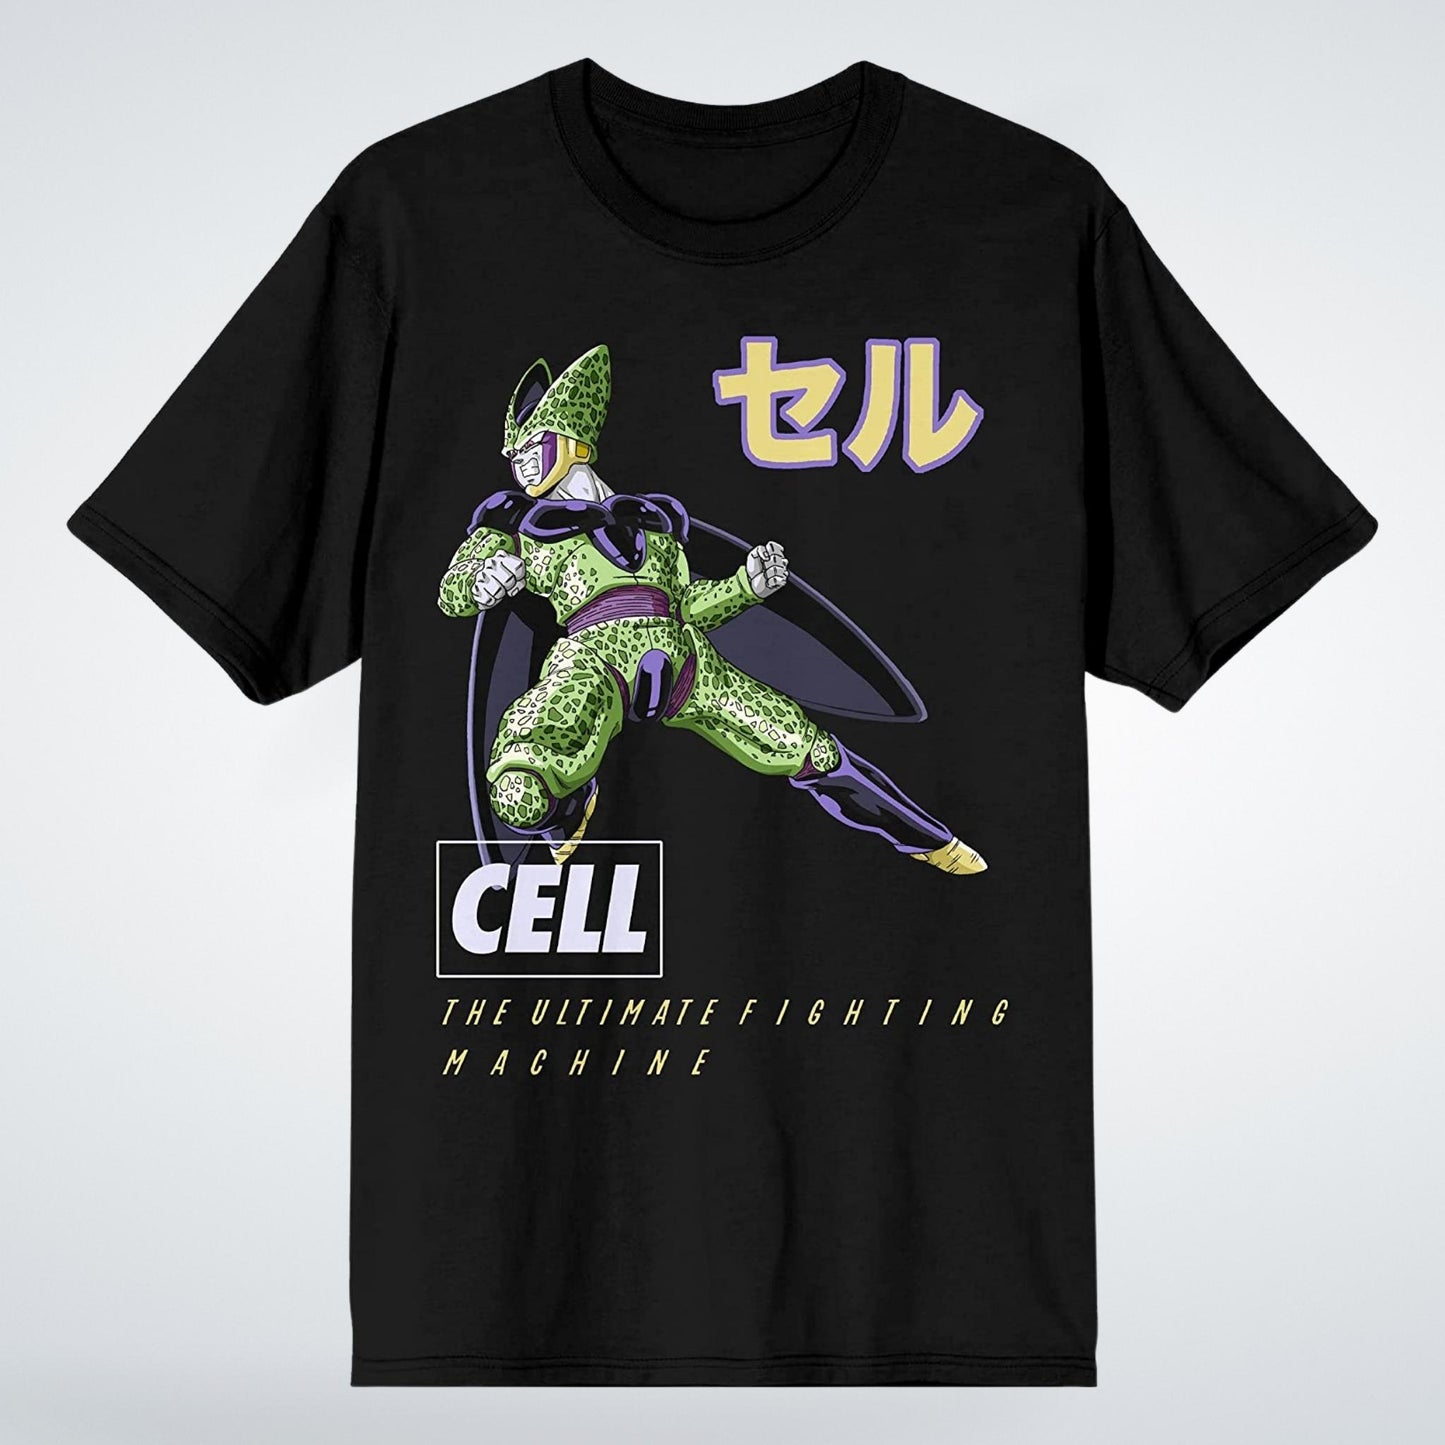 *Clearance* Cell "The Ultimate Fighting Machine" (Dragon Ball Z) Unisex Shirt